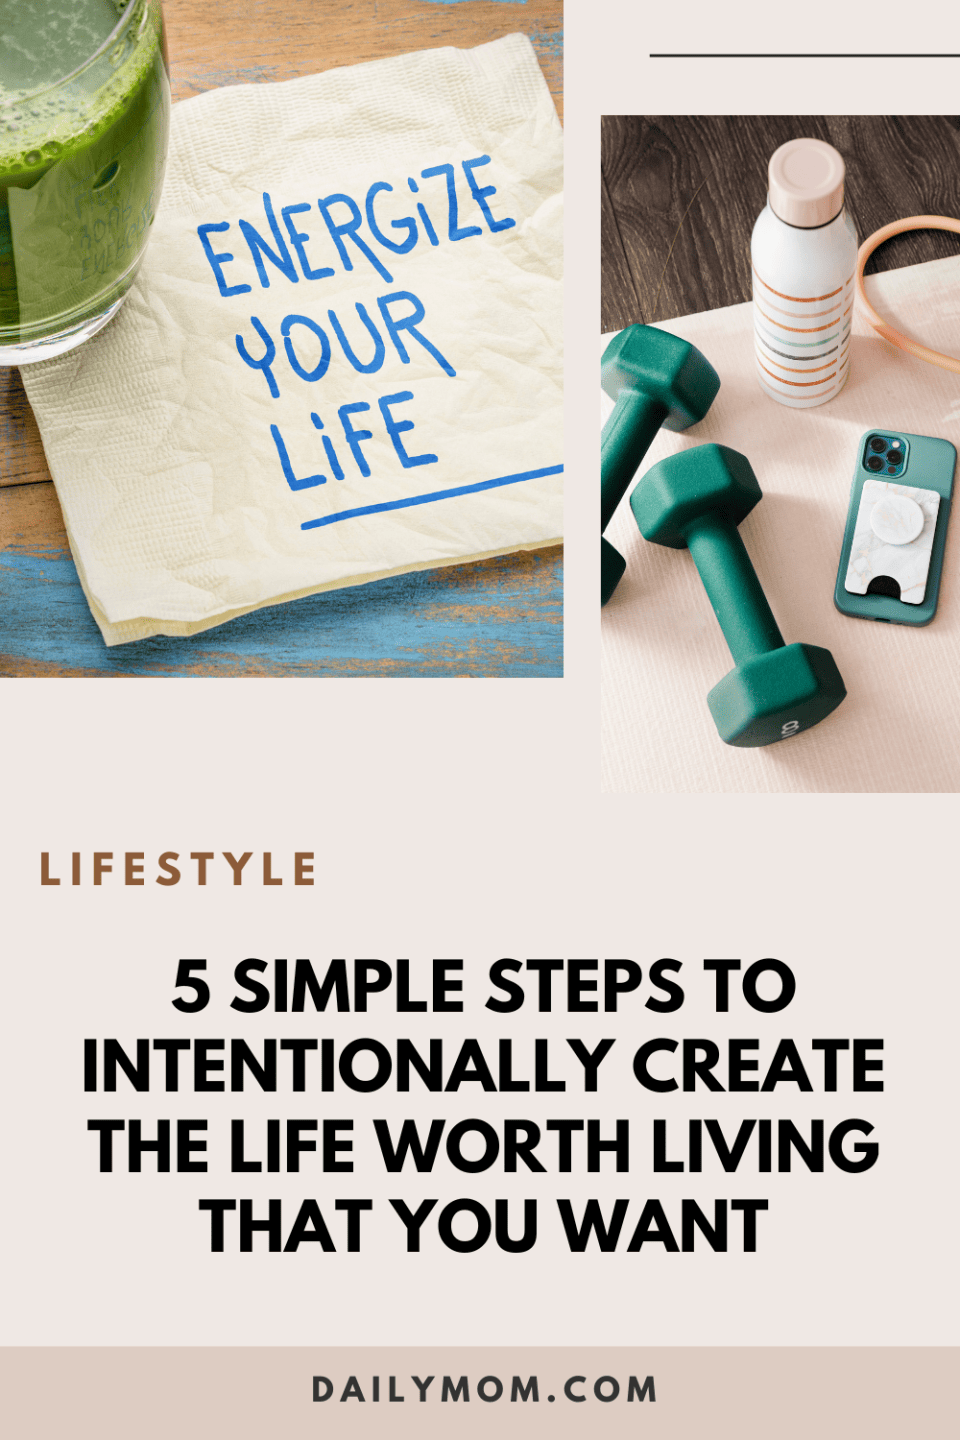 5 Simple Steps To Intentionally Create The Life Worth Living That You Want